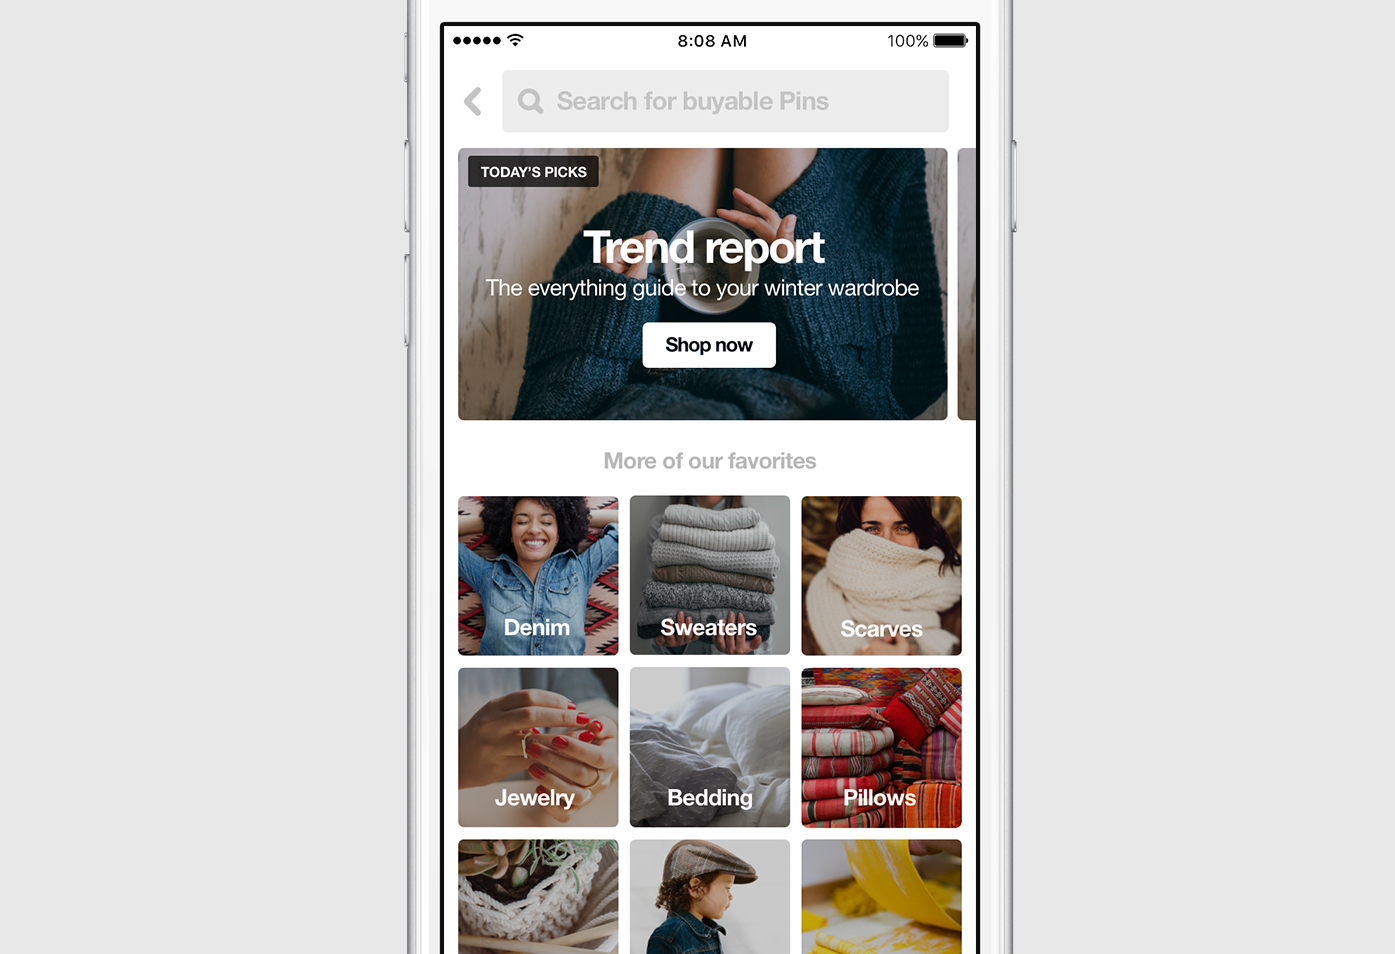 Pinterest Launches “The Pinterest Shop” To Buy All That Stuff You See Pinned